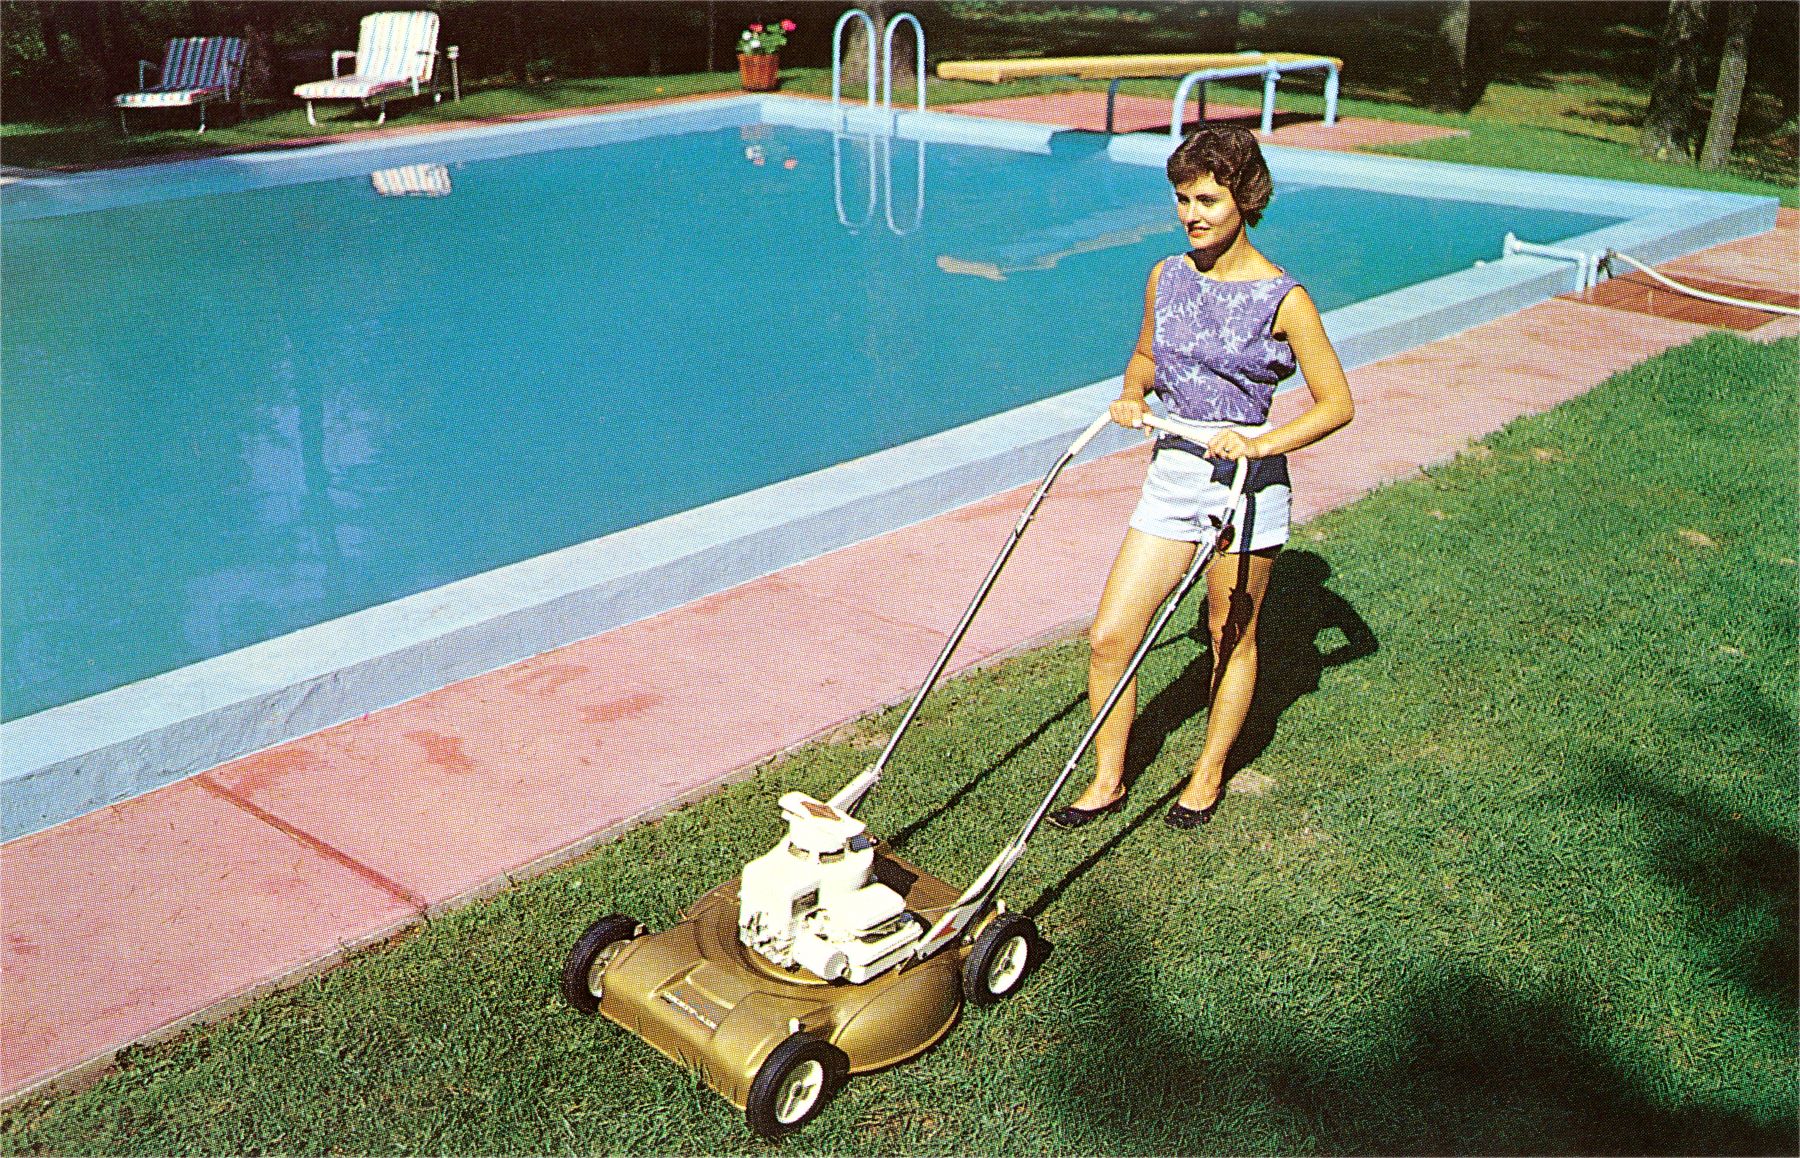 A woman mowing her lawn and cutting grass by the pool